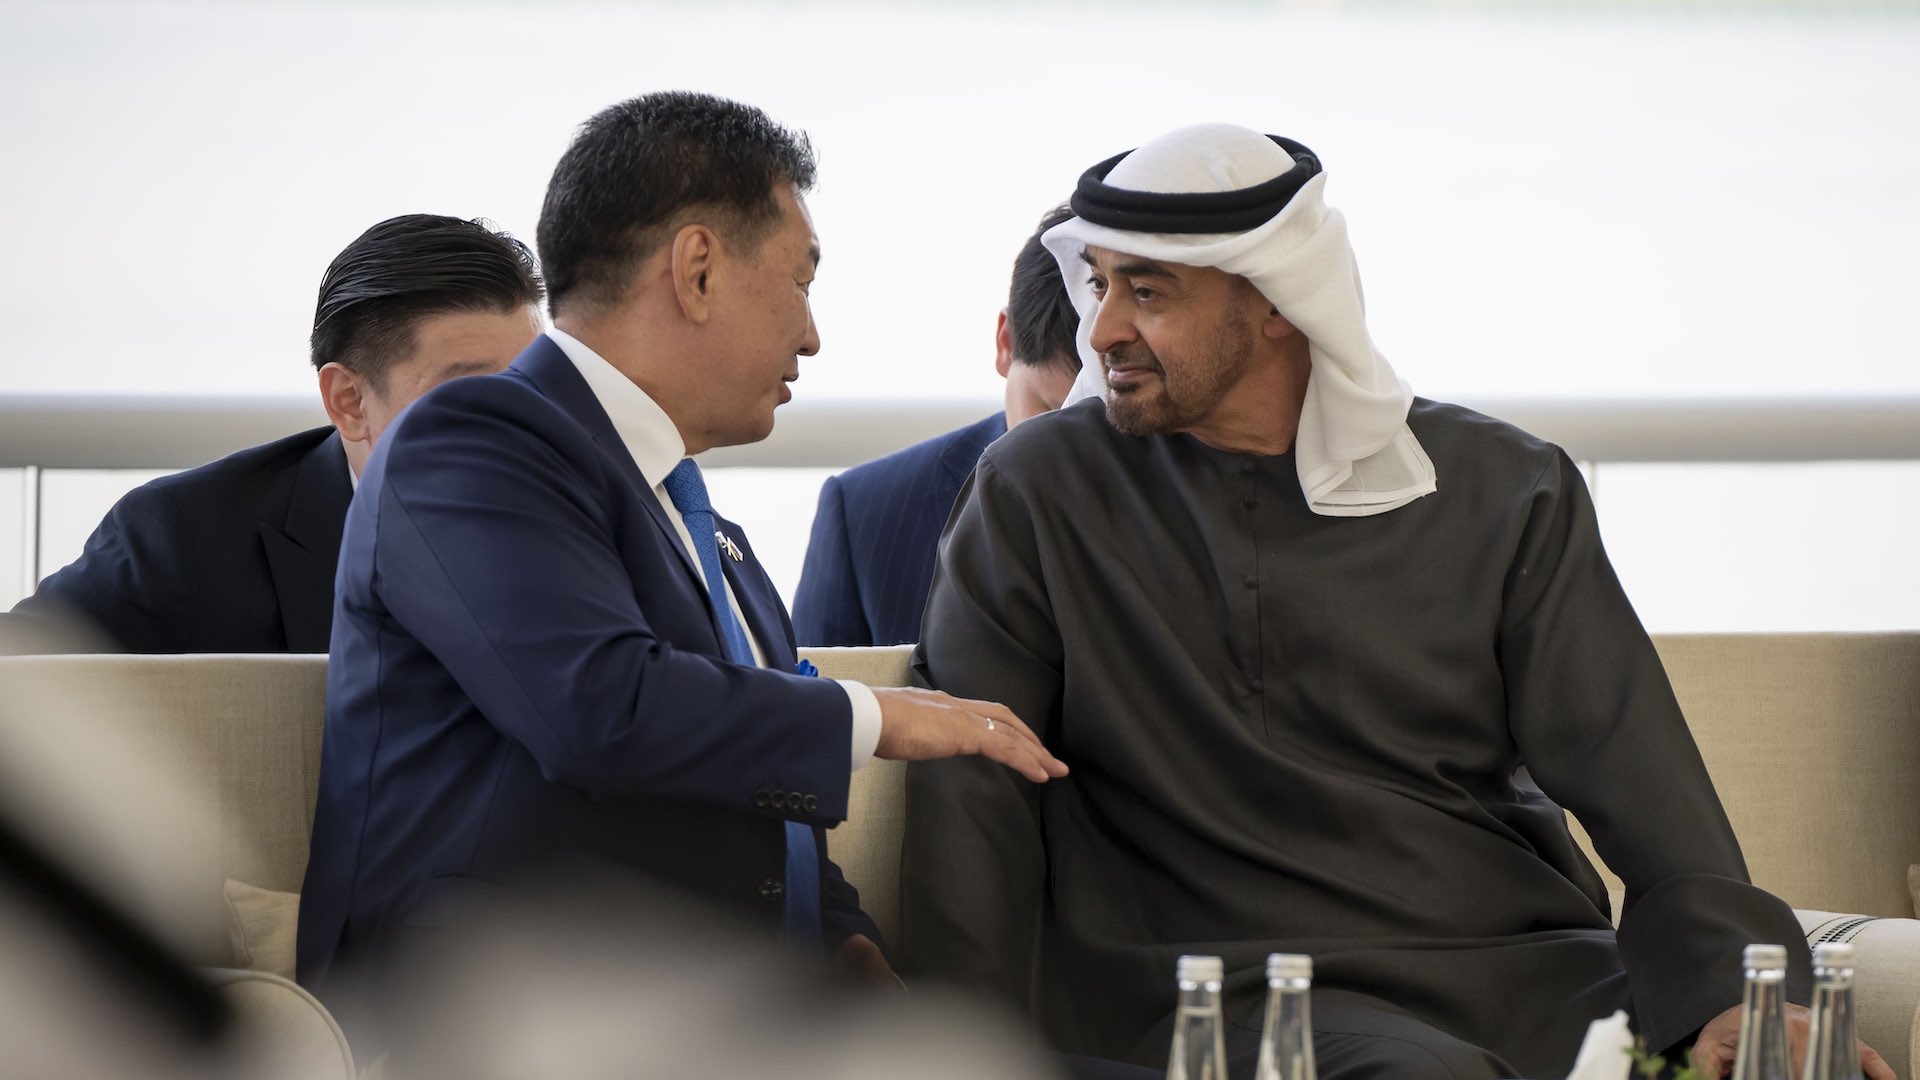 UAE and Mongolia strengthen ties with strategic agreements in Abu Dhabi